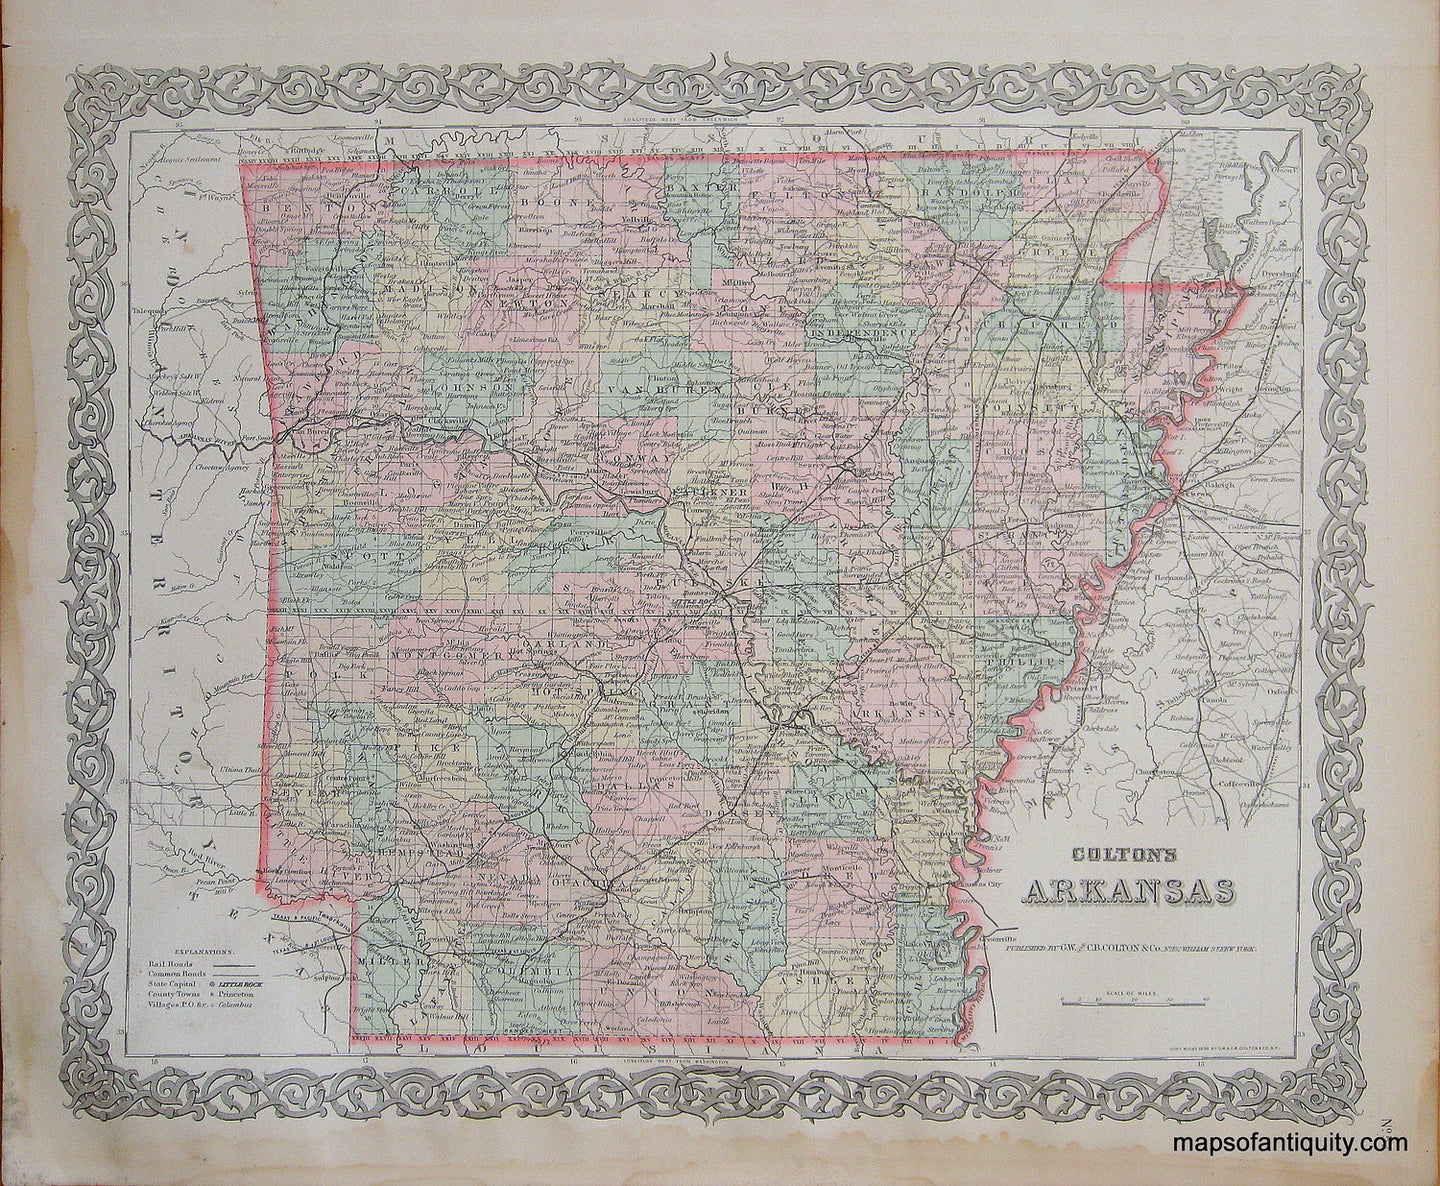 Antique-Hand-Colored-Map-Colton's-Arkansas-United-States-Arkansas-1887-Colton-Maps-Of-Antiquity